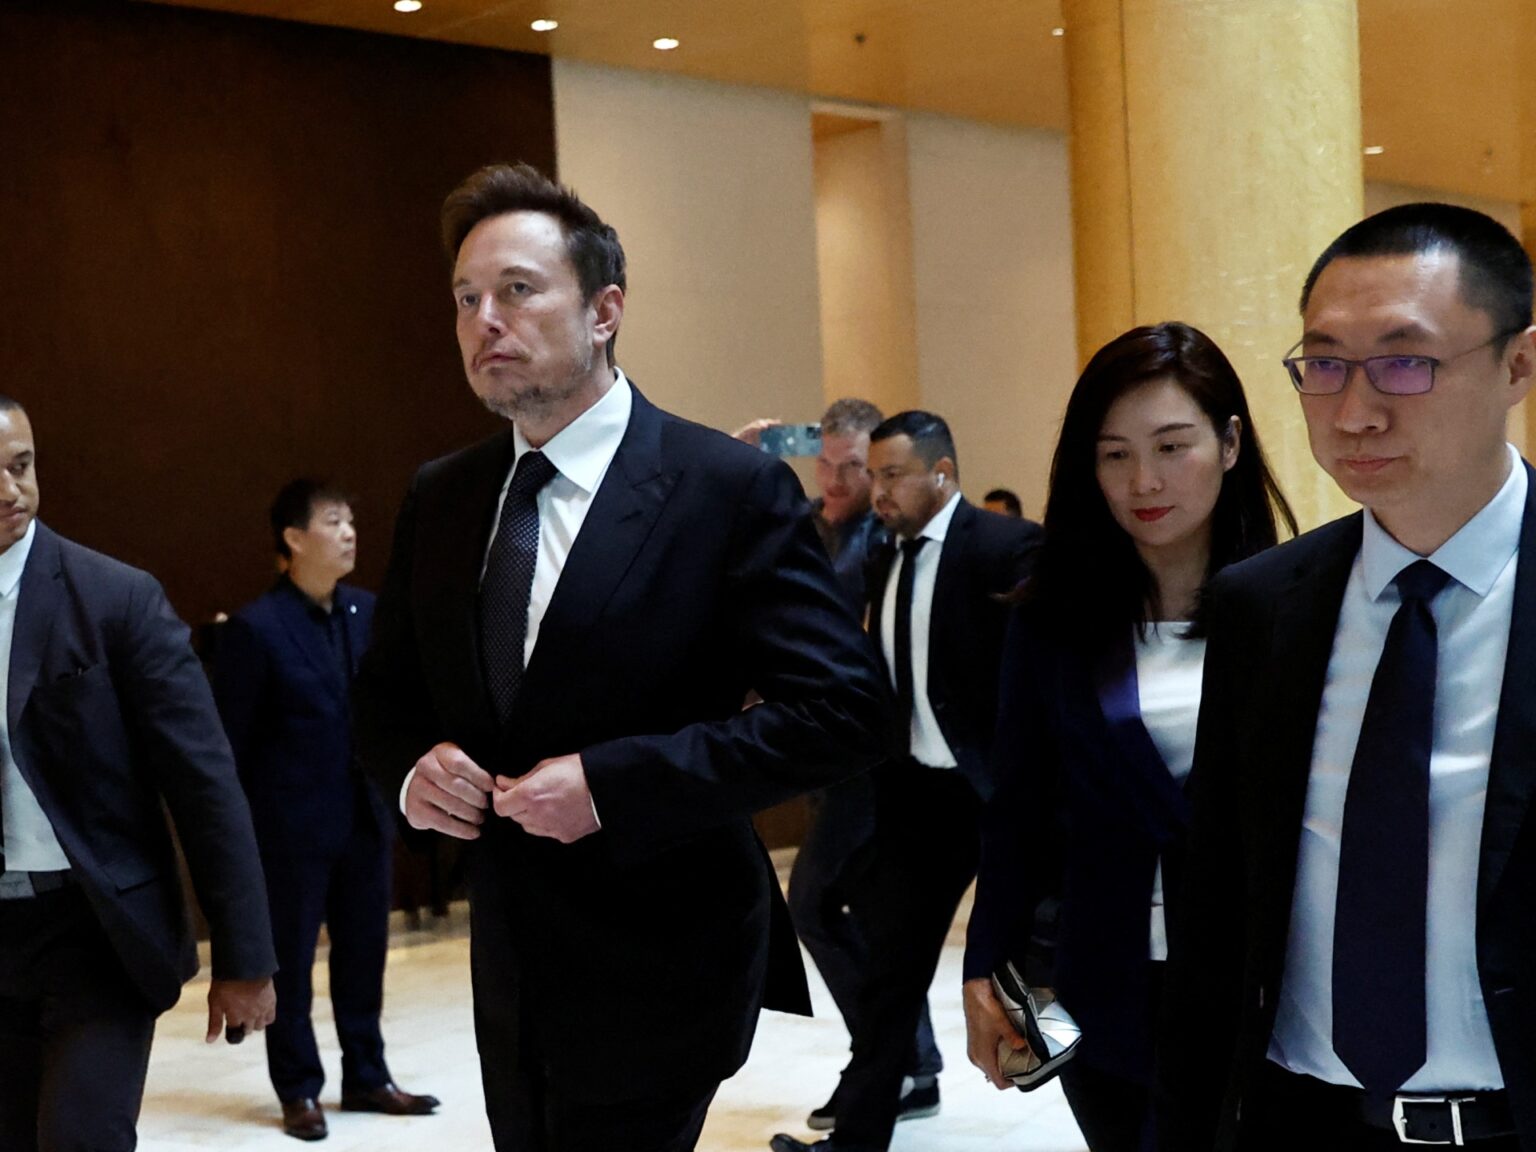 In China, Elon Musk talks about ‘intelligently networked’